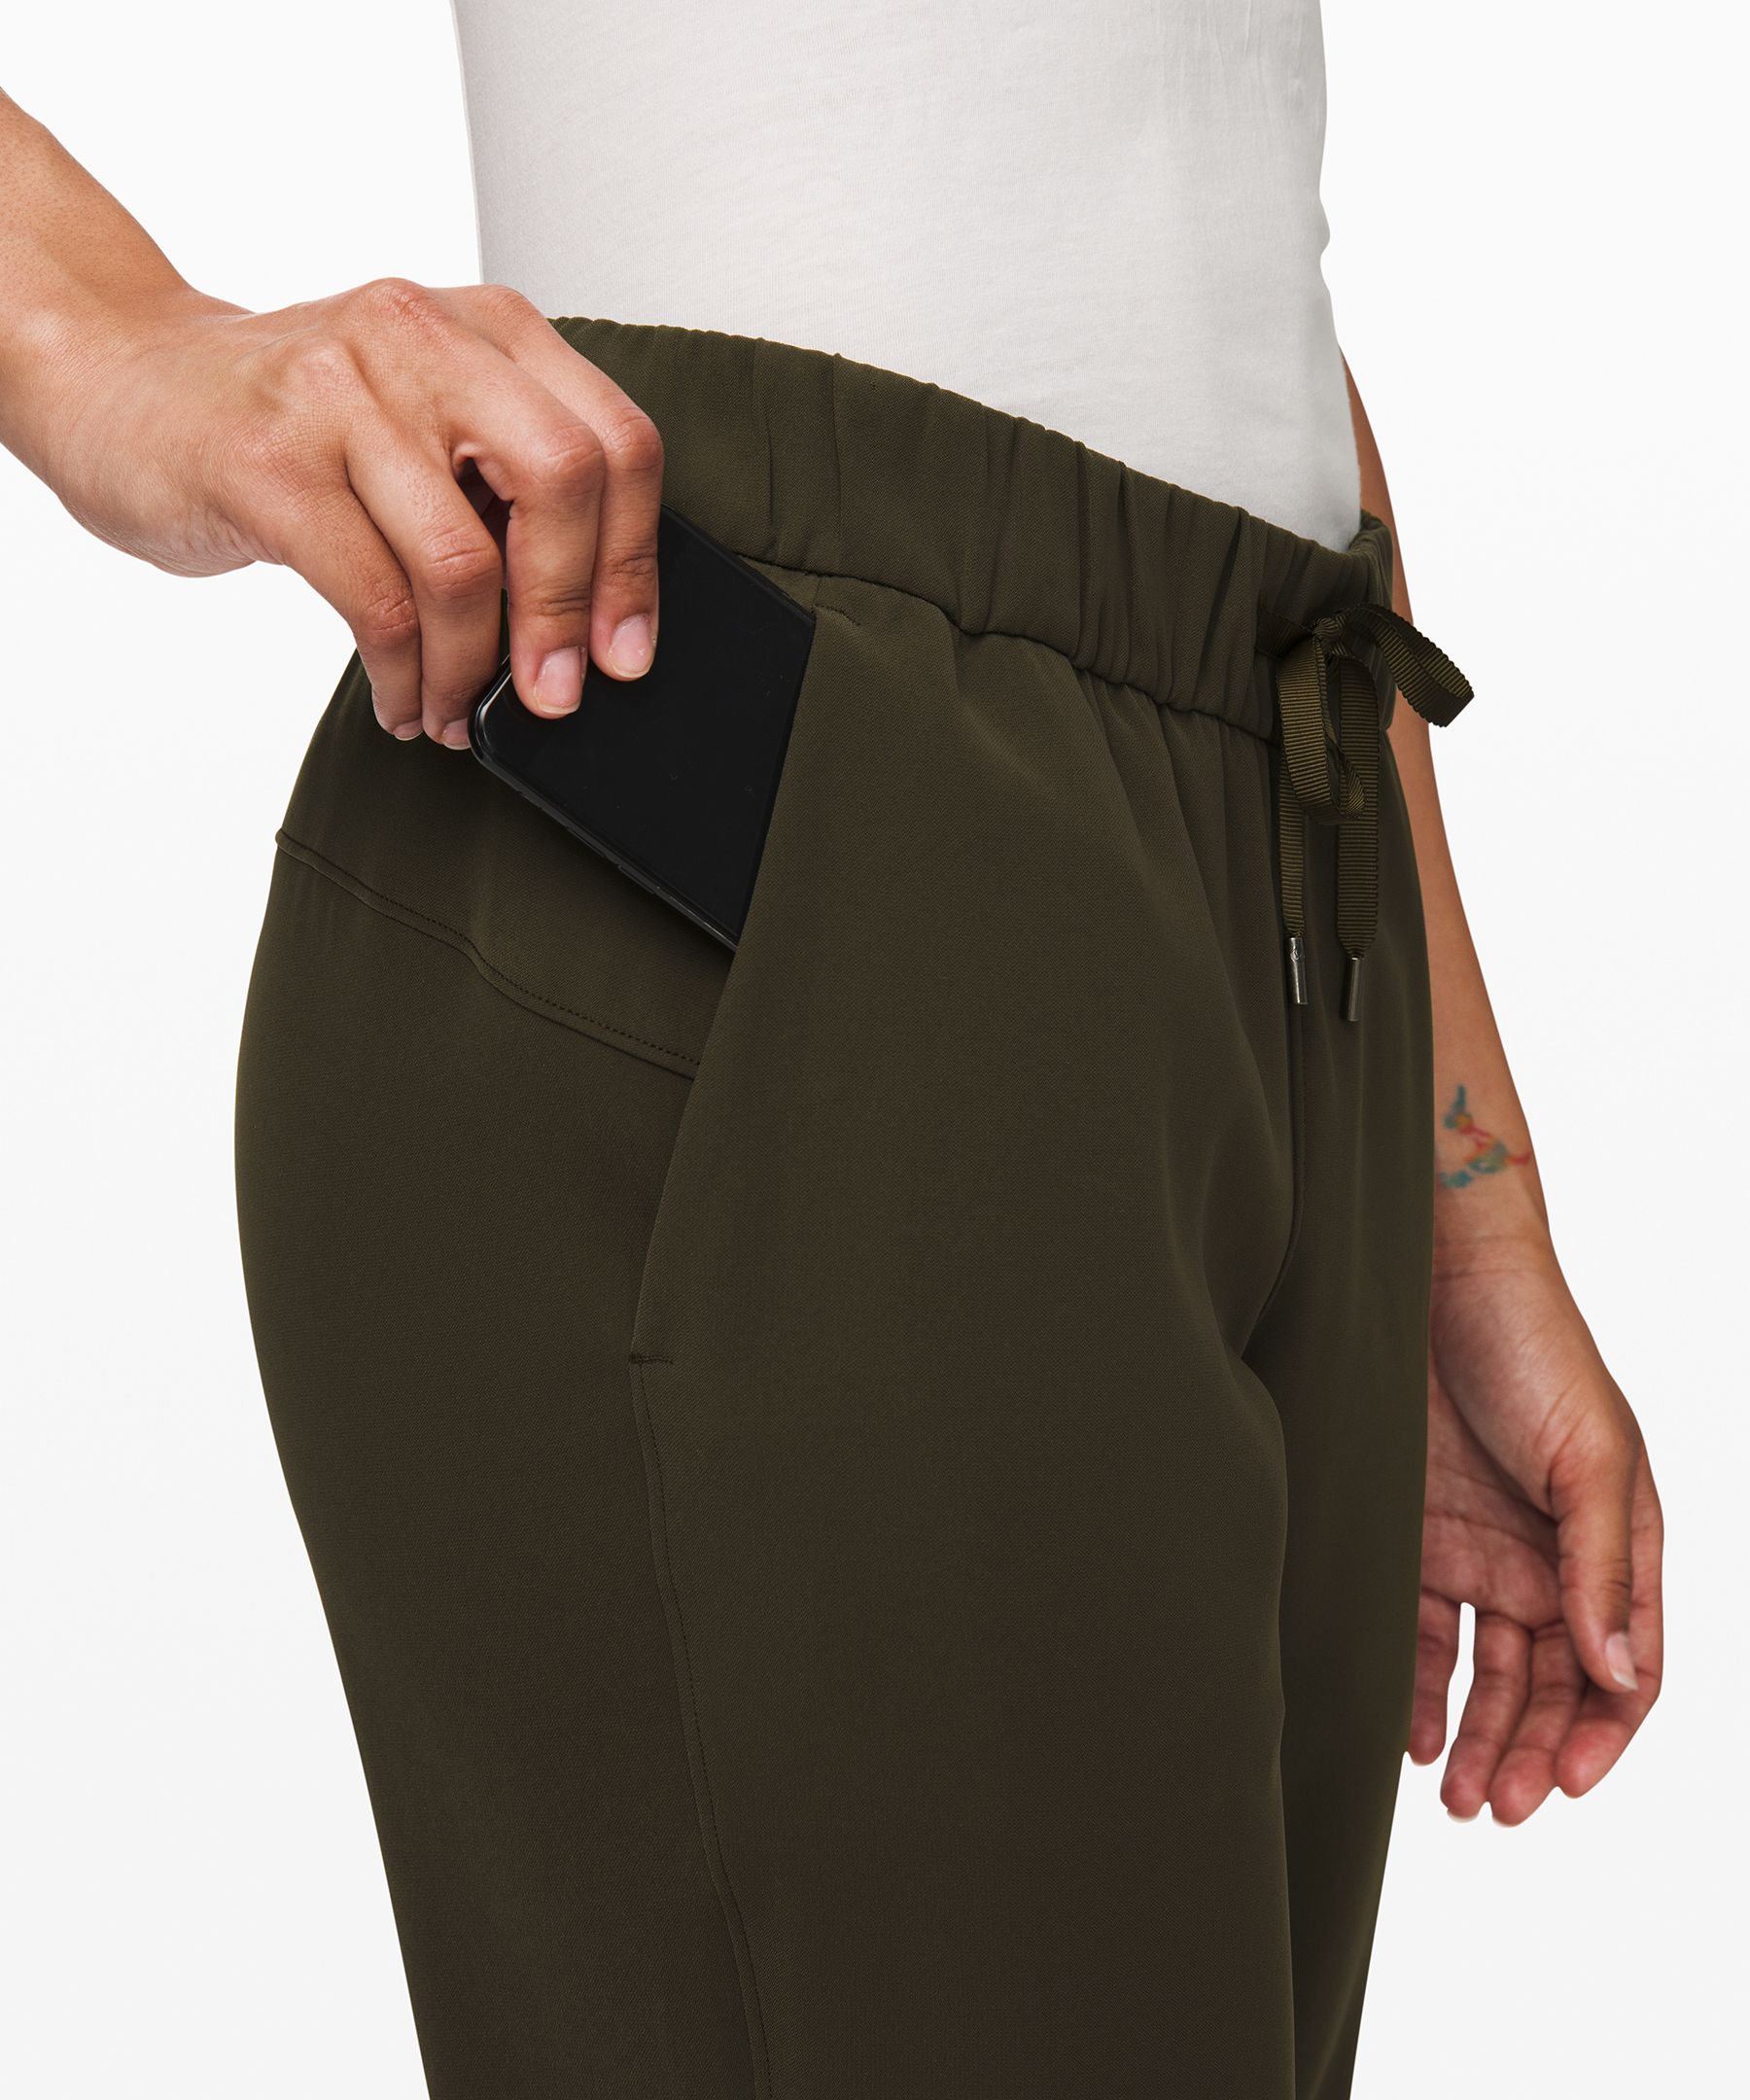 Lululemon On The Fly Pant *28 - Dark Olive (First Release) - lulu